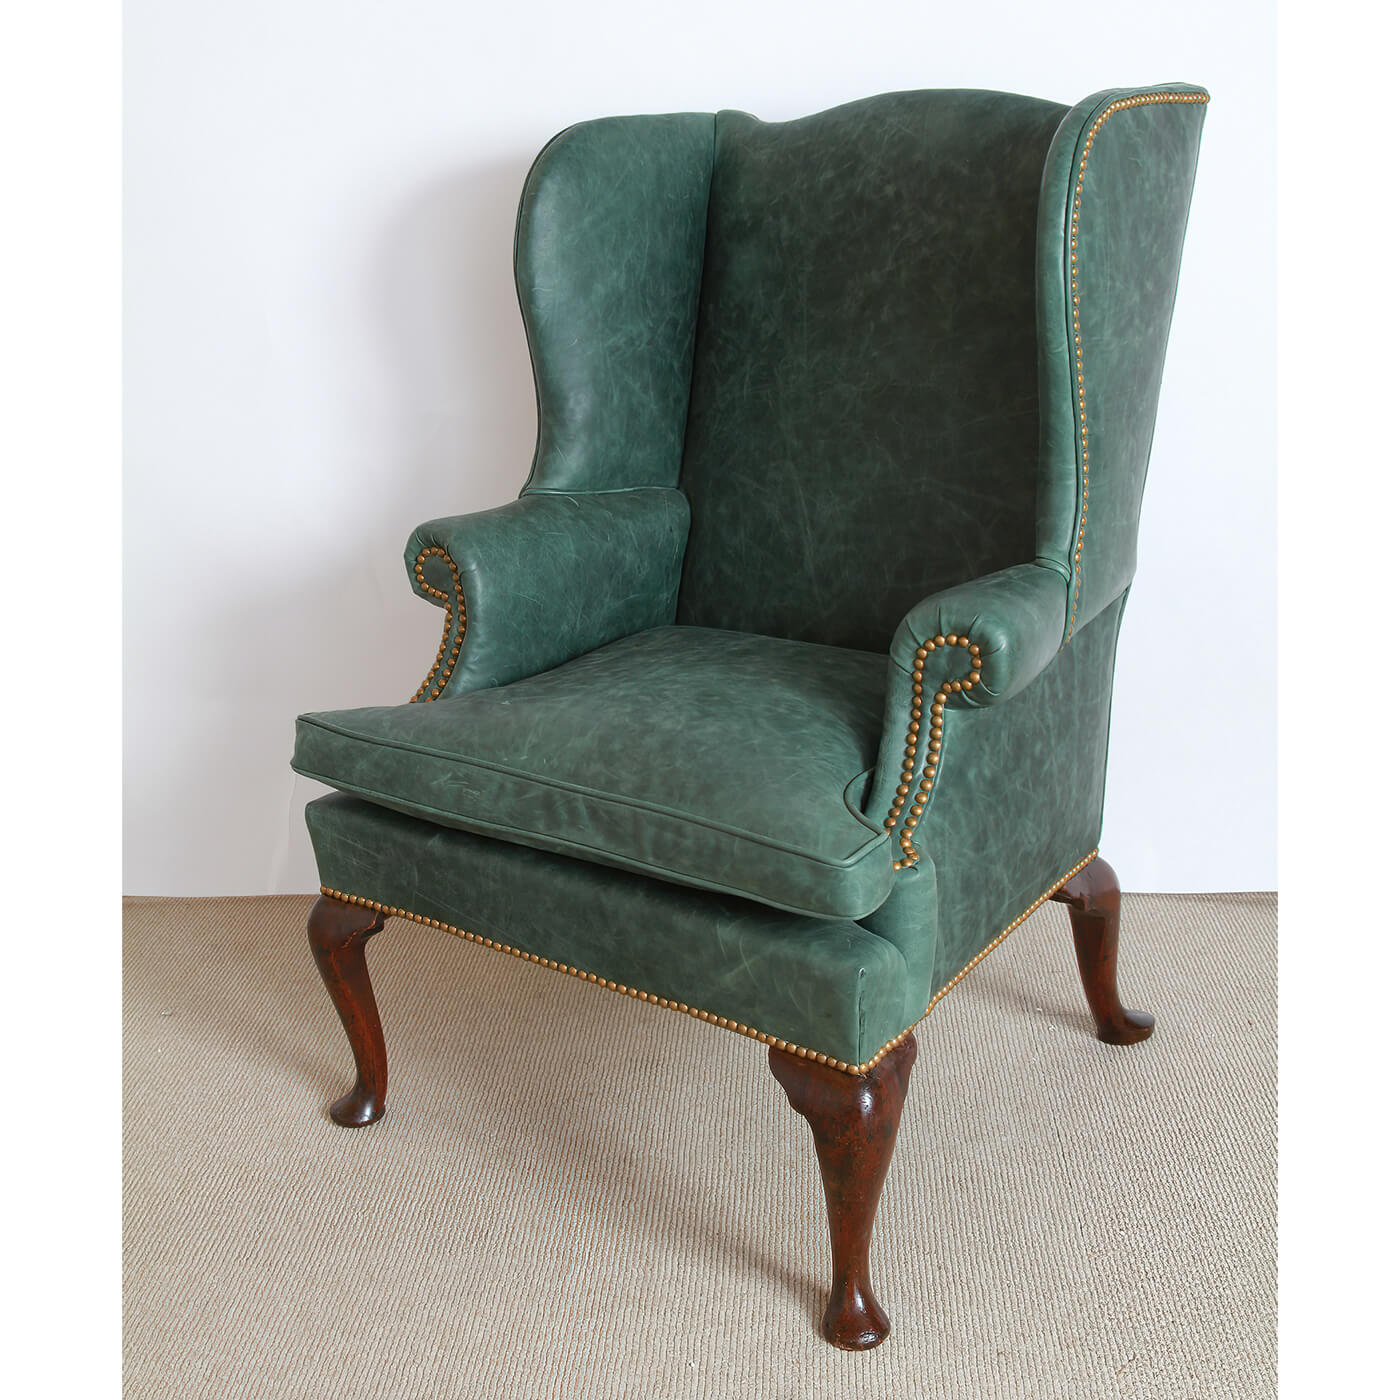 Queen Anne Leather Upholstered Wingchair - English Georgian America